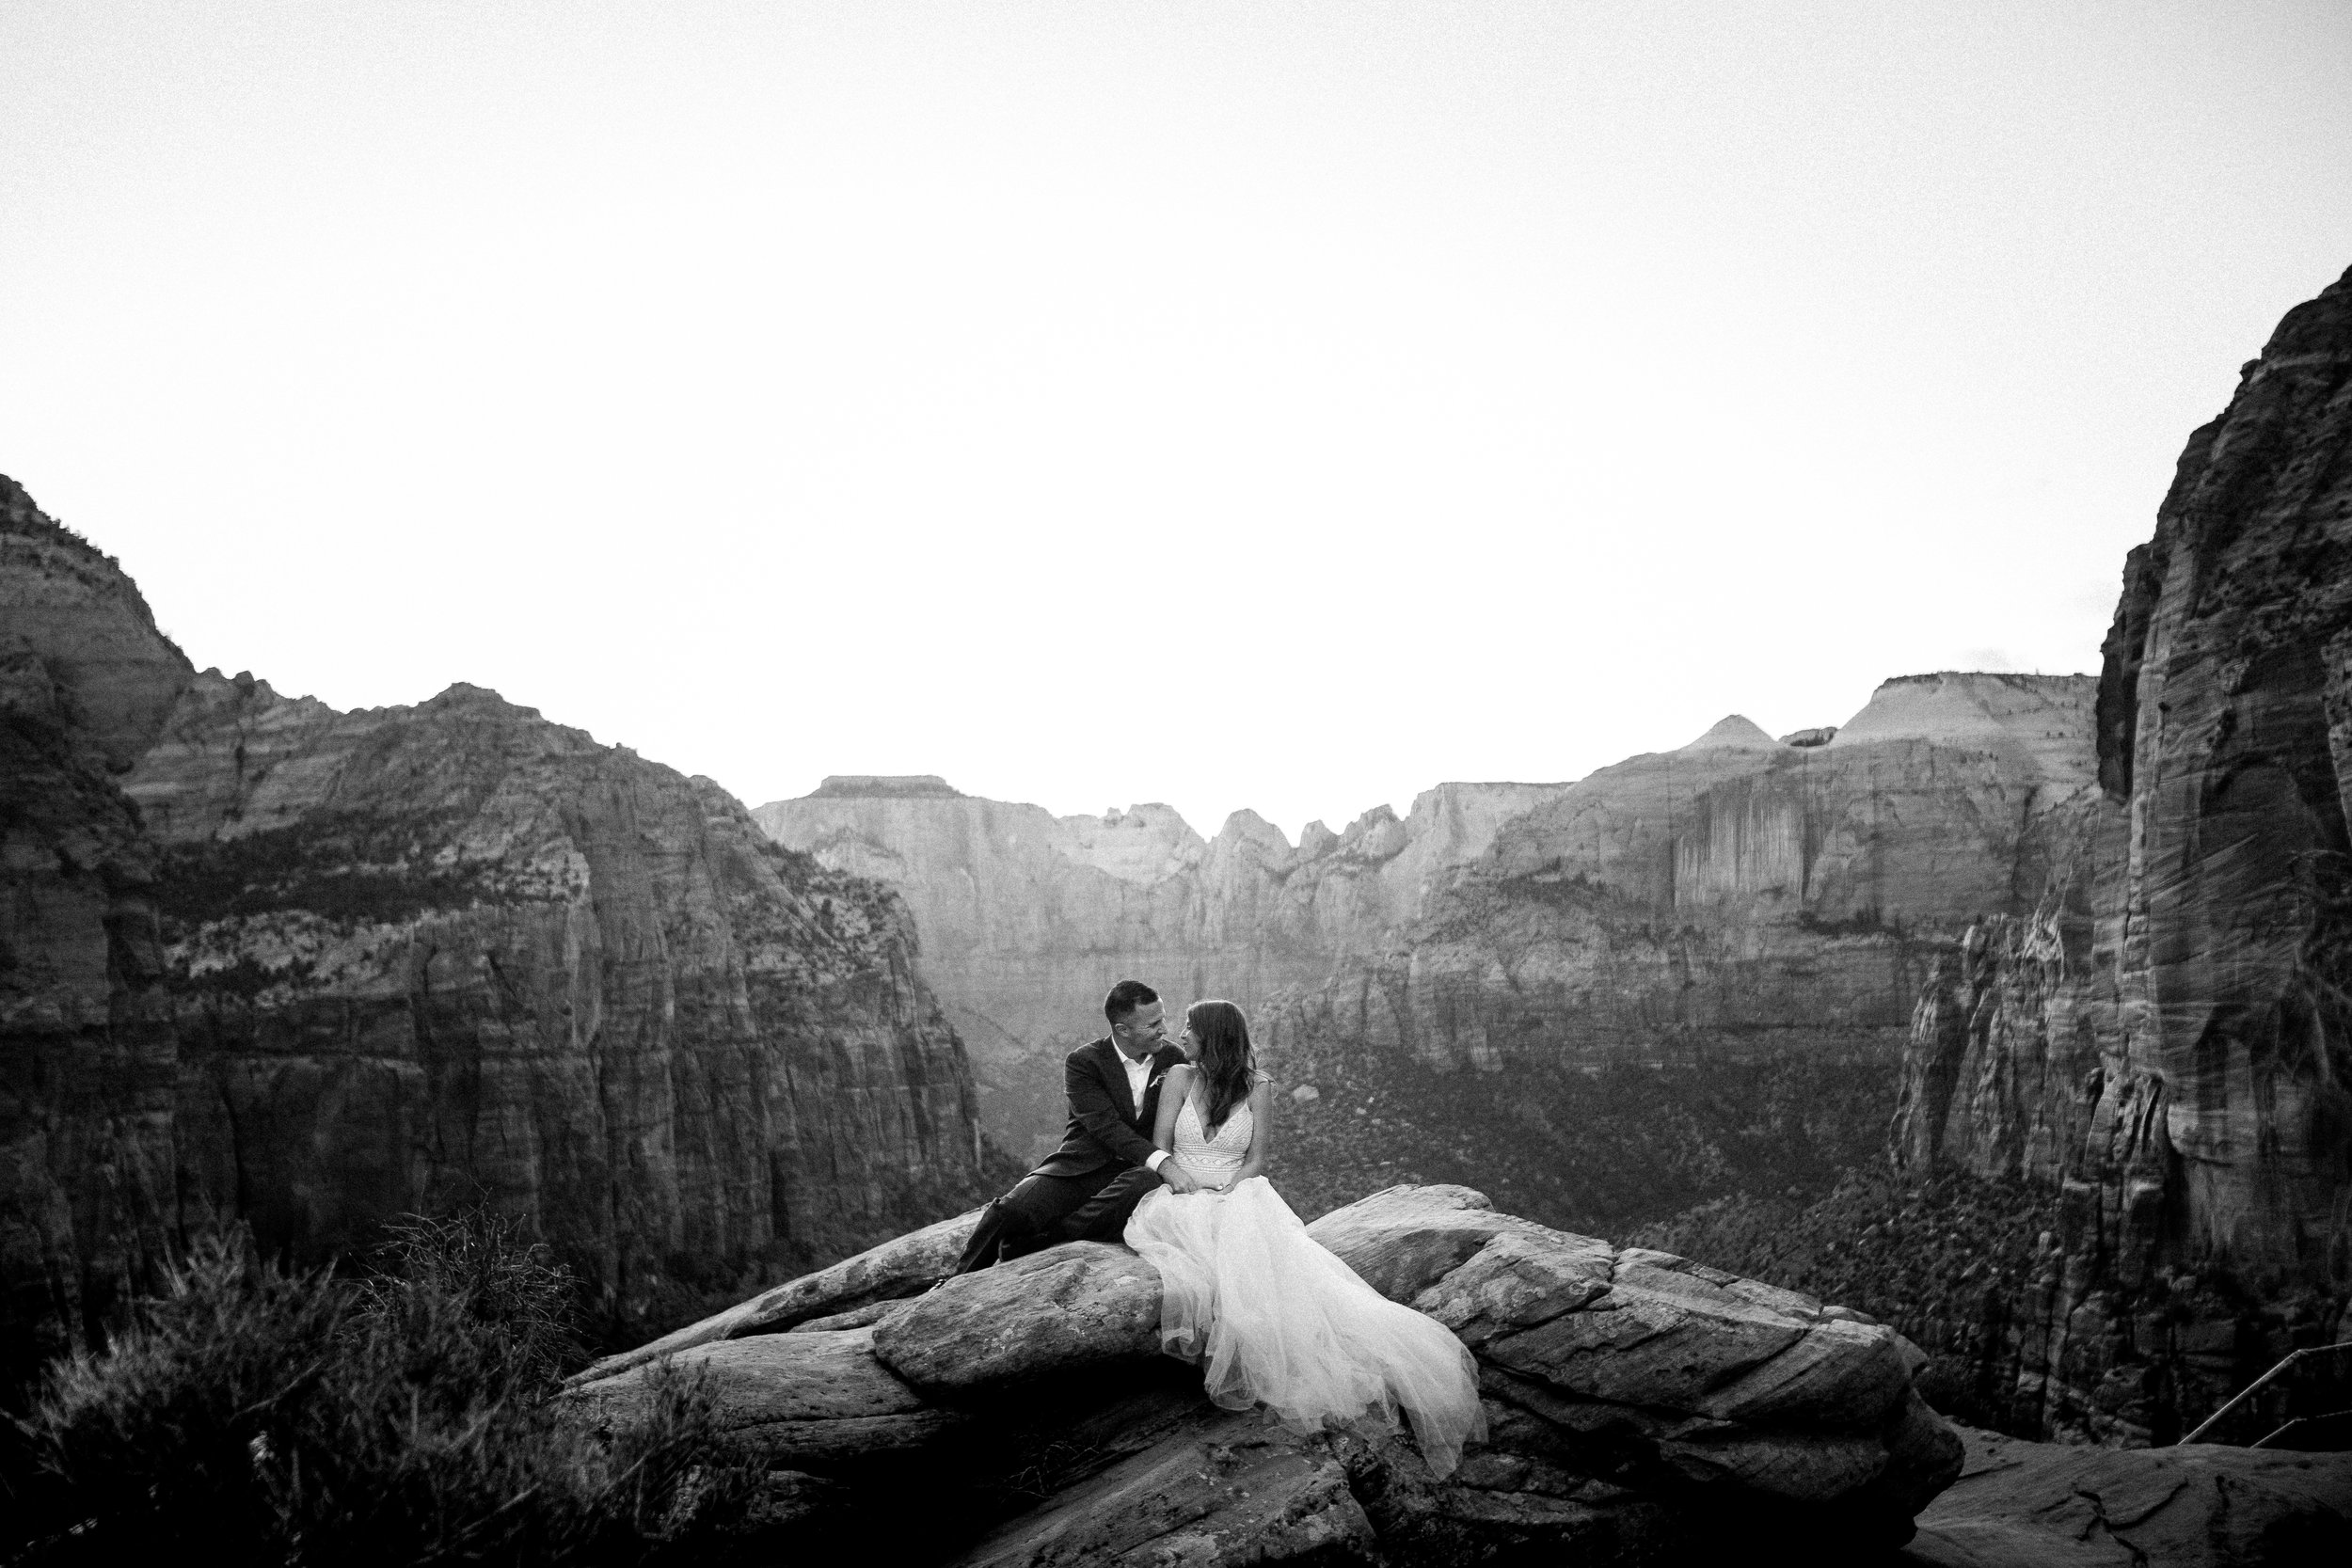 nicole-daacke-photography-zion-national-park-elopement-photographer-canyon-overlook-trail-elope-hiking-adventure-wedding-photos-fall-utah-red-rock-canyon-stgeorge-eloping-photographer-88.jpg